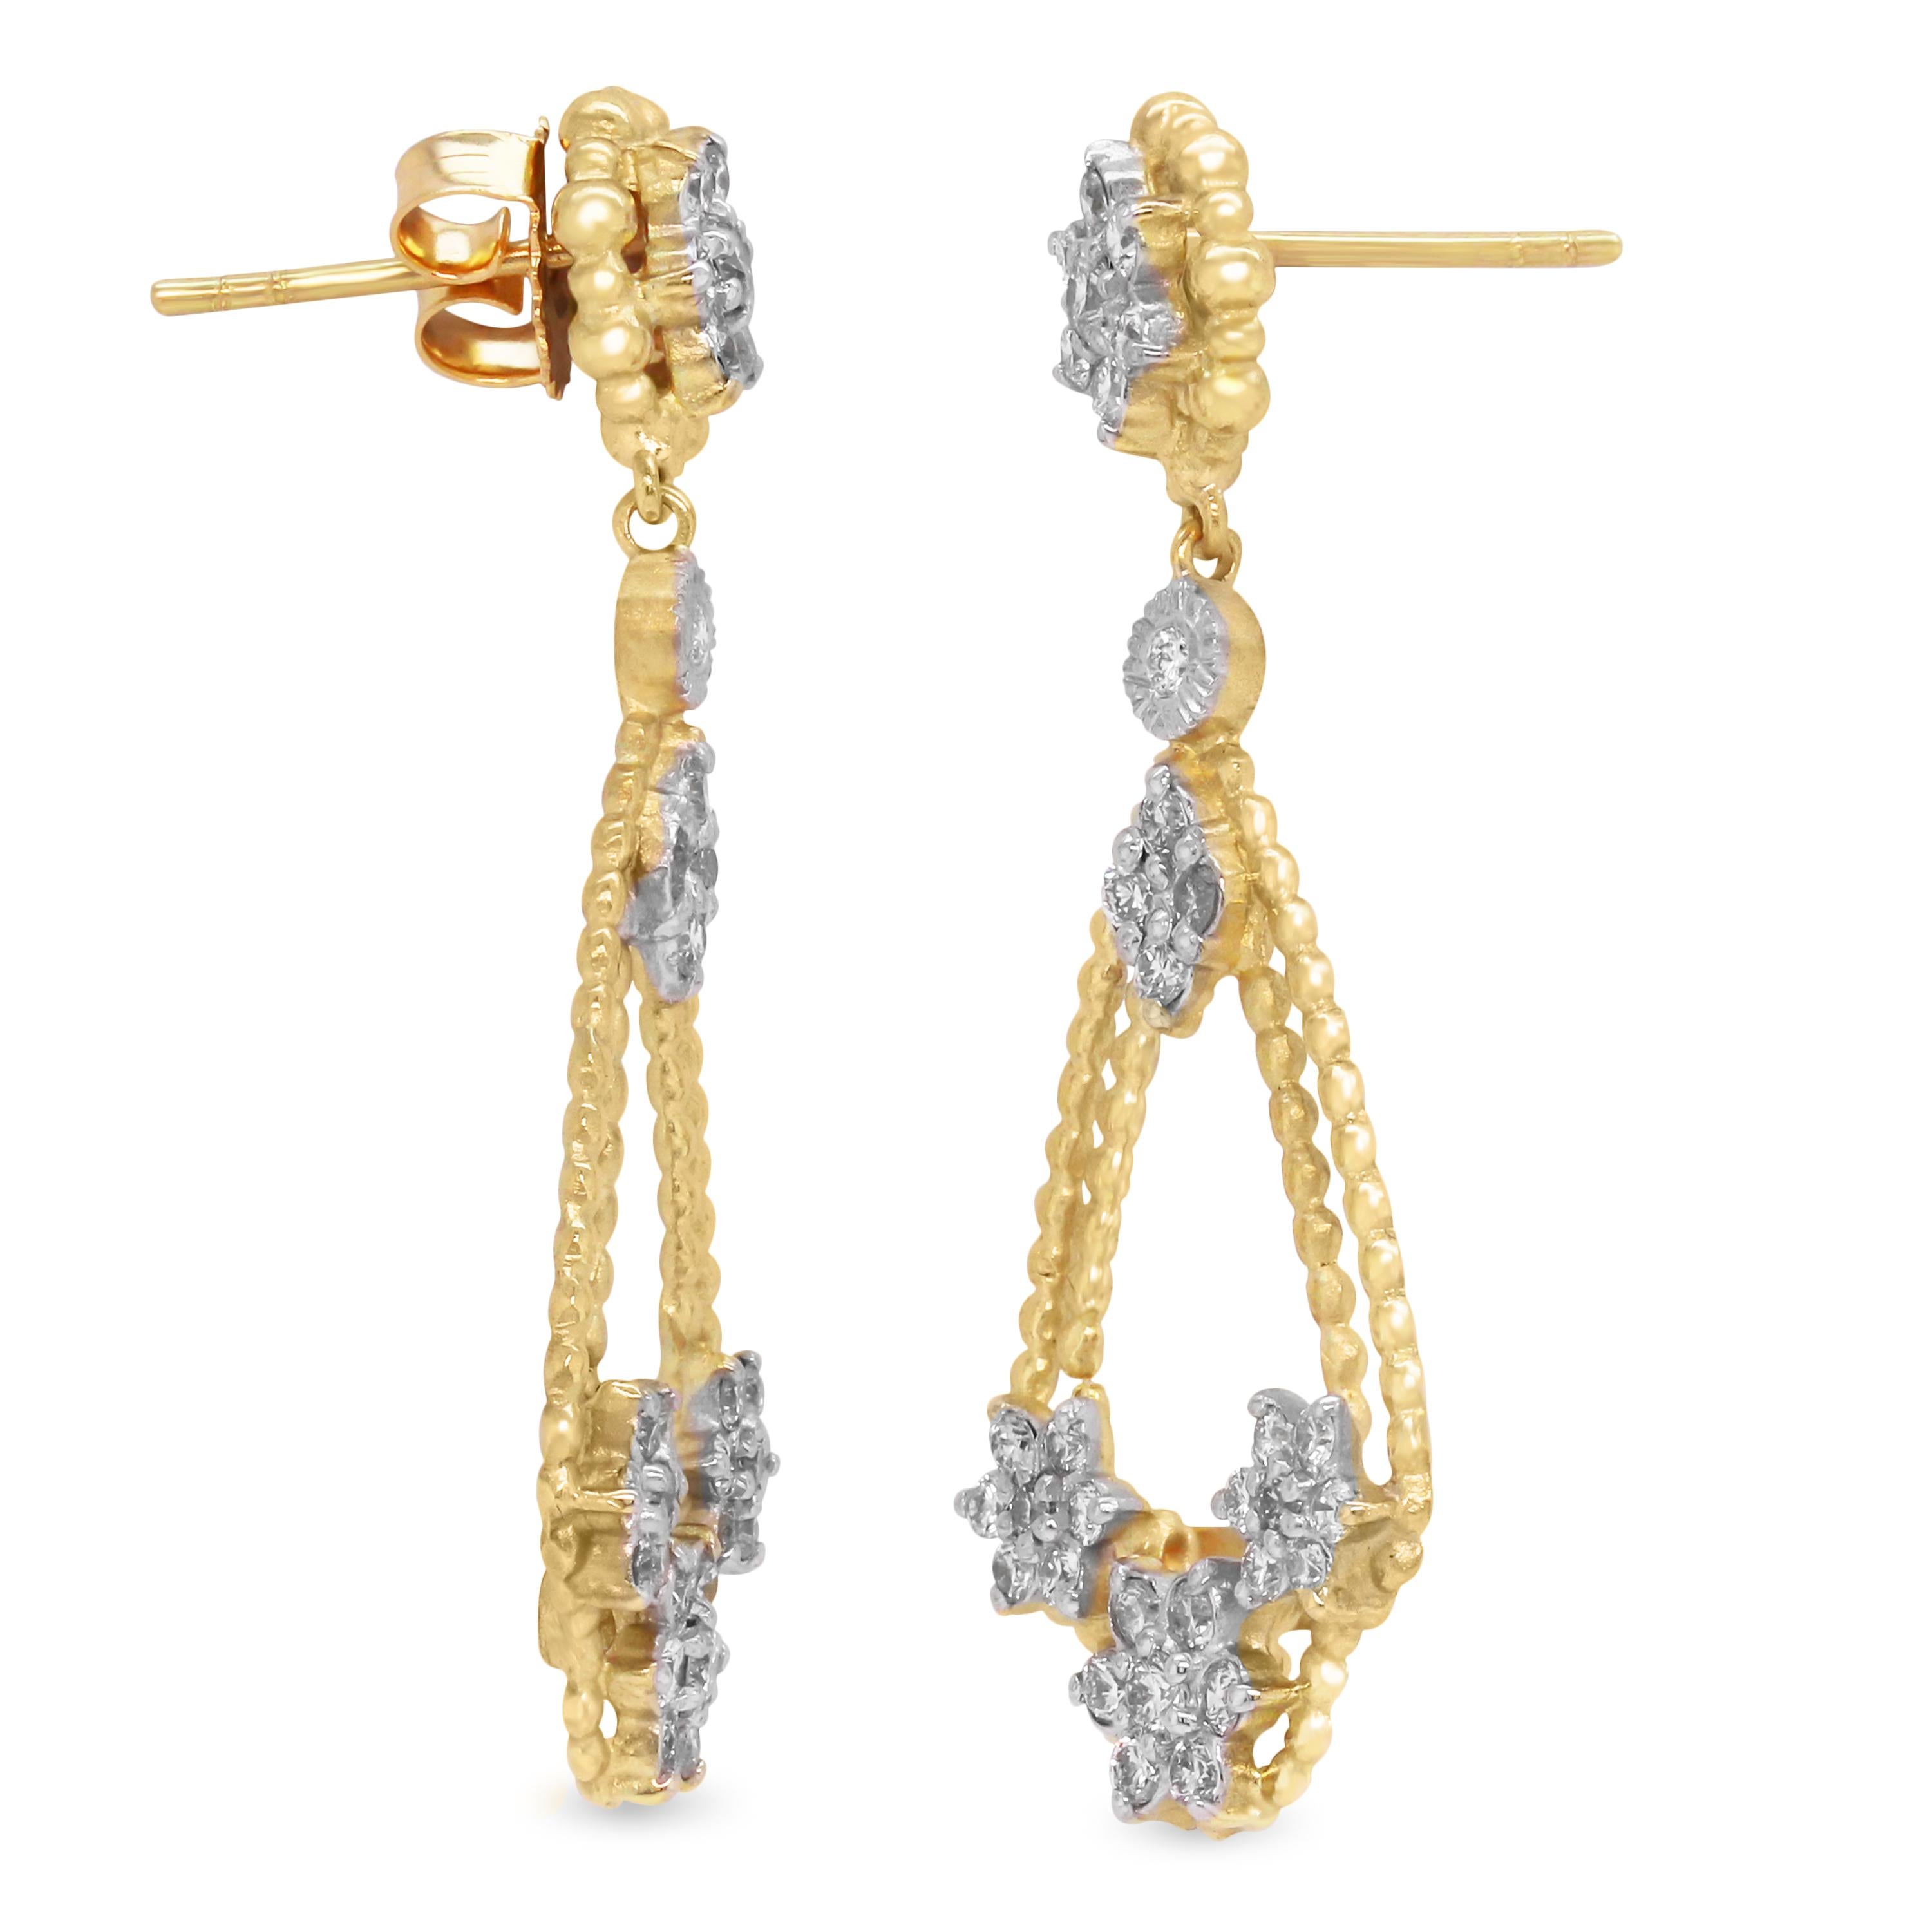 Stambolian 18K Yellow White Gold Diamond Clusters Drop Dangle Earrings

A unique and everyday pair of earrings for the two-tone gold lover. Diamonds begin at the top and are spread throughout the pair.

1.39 carat G color, VS clarity diamonds total